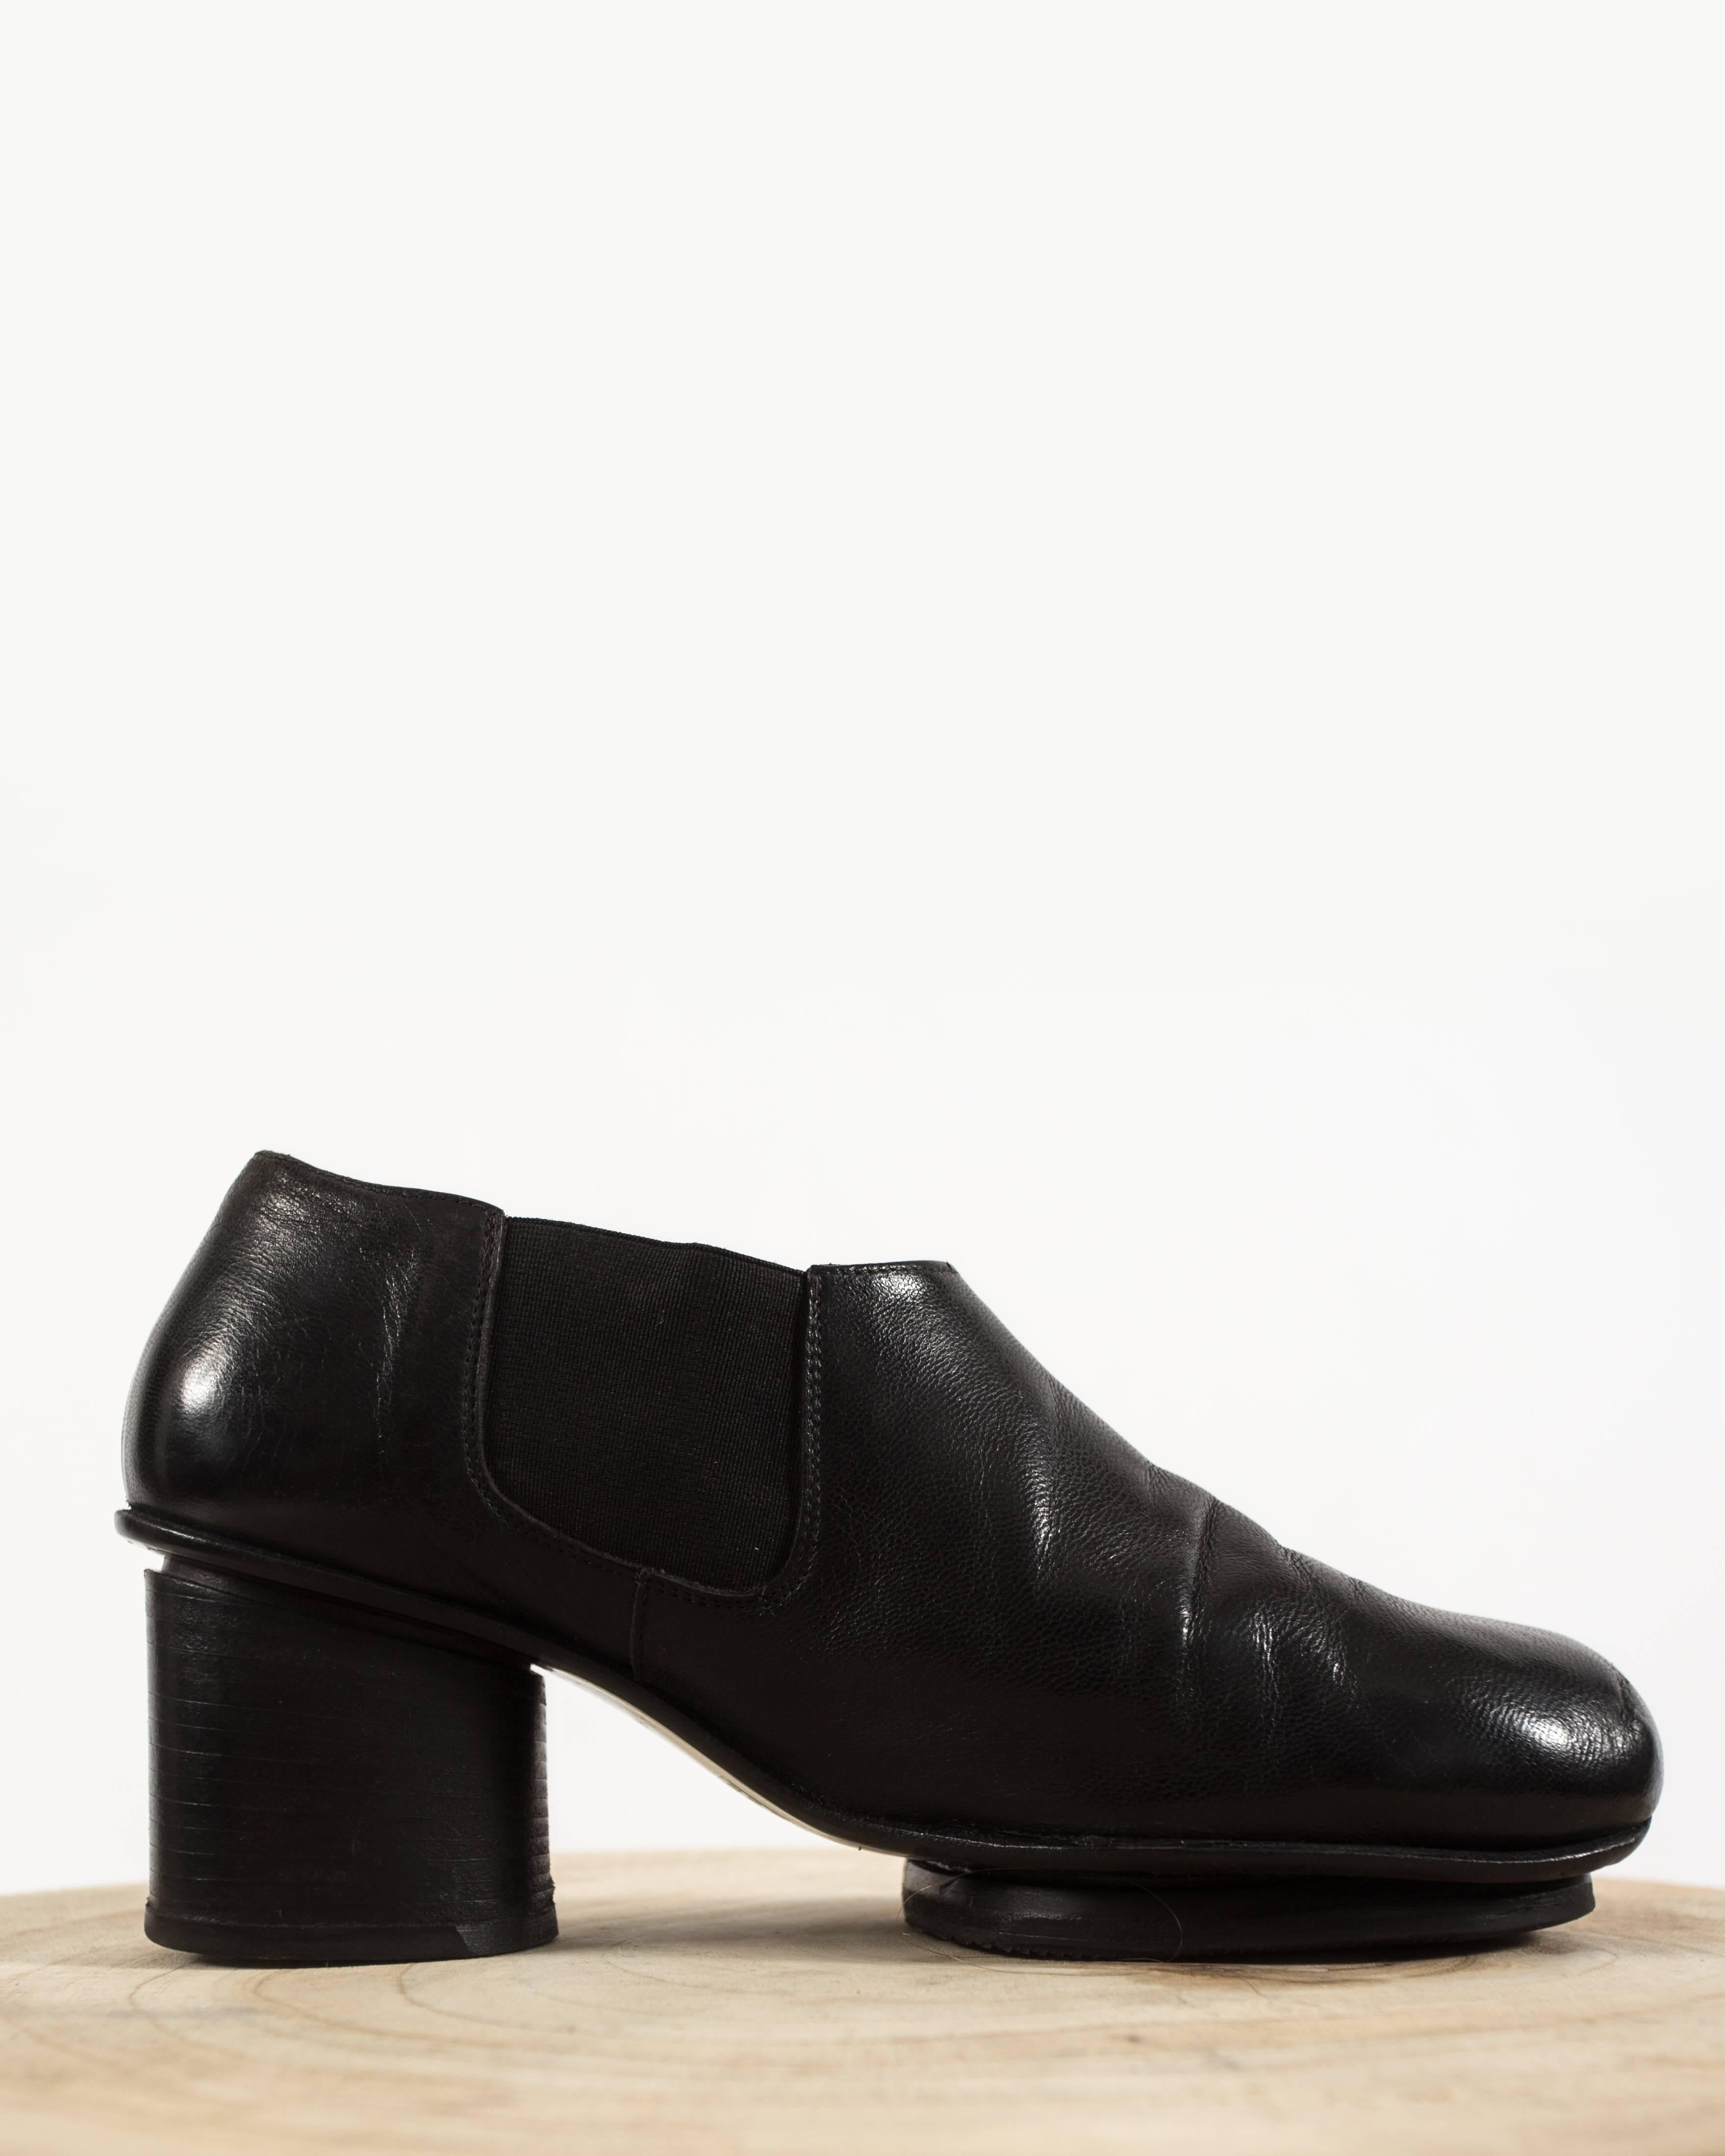 Introducing the Martin Margiela Autumn-Winter 1999 shoes, a remarkable and innovative footwear creation from the avant-garde designer's iconic collection.

Crafted from luxurious black leather, these shoes feature round tips and a high oval stacked